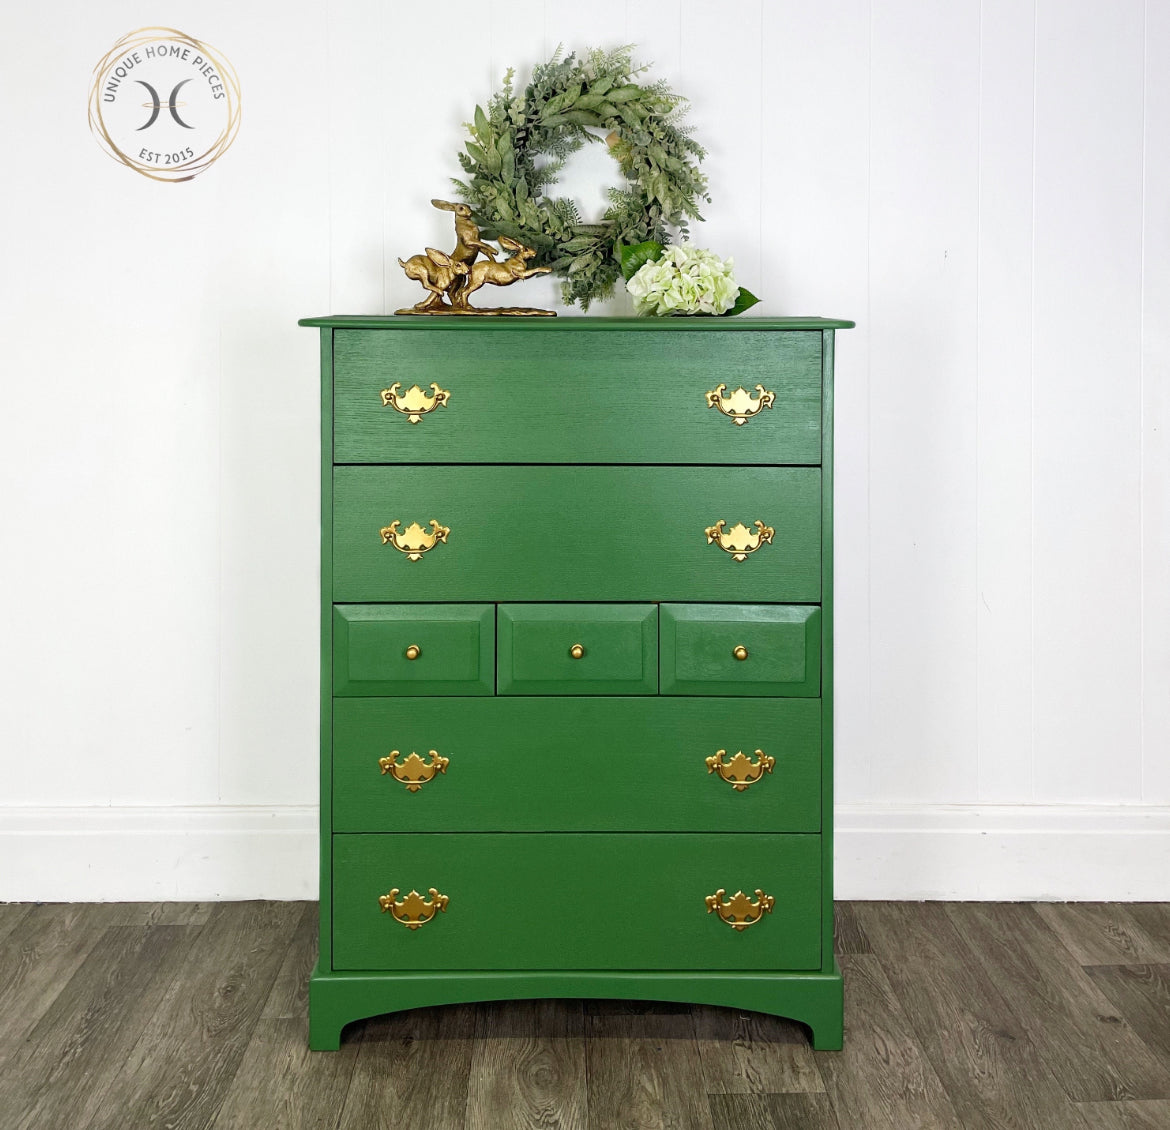 Stag 7 Drawer Chest, Available for Commission, Tallboy Dresser